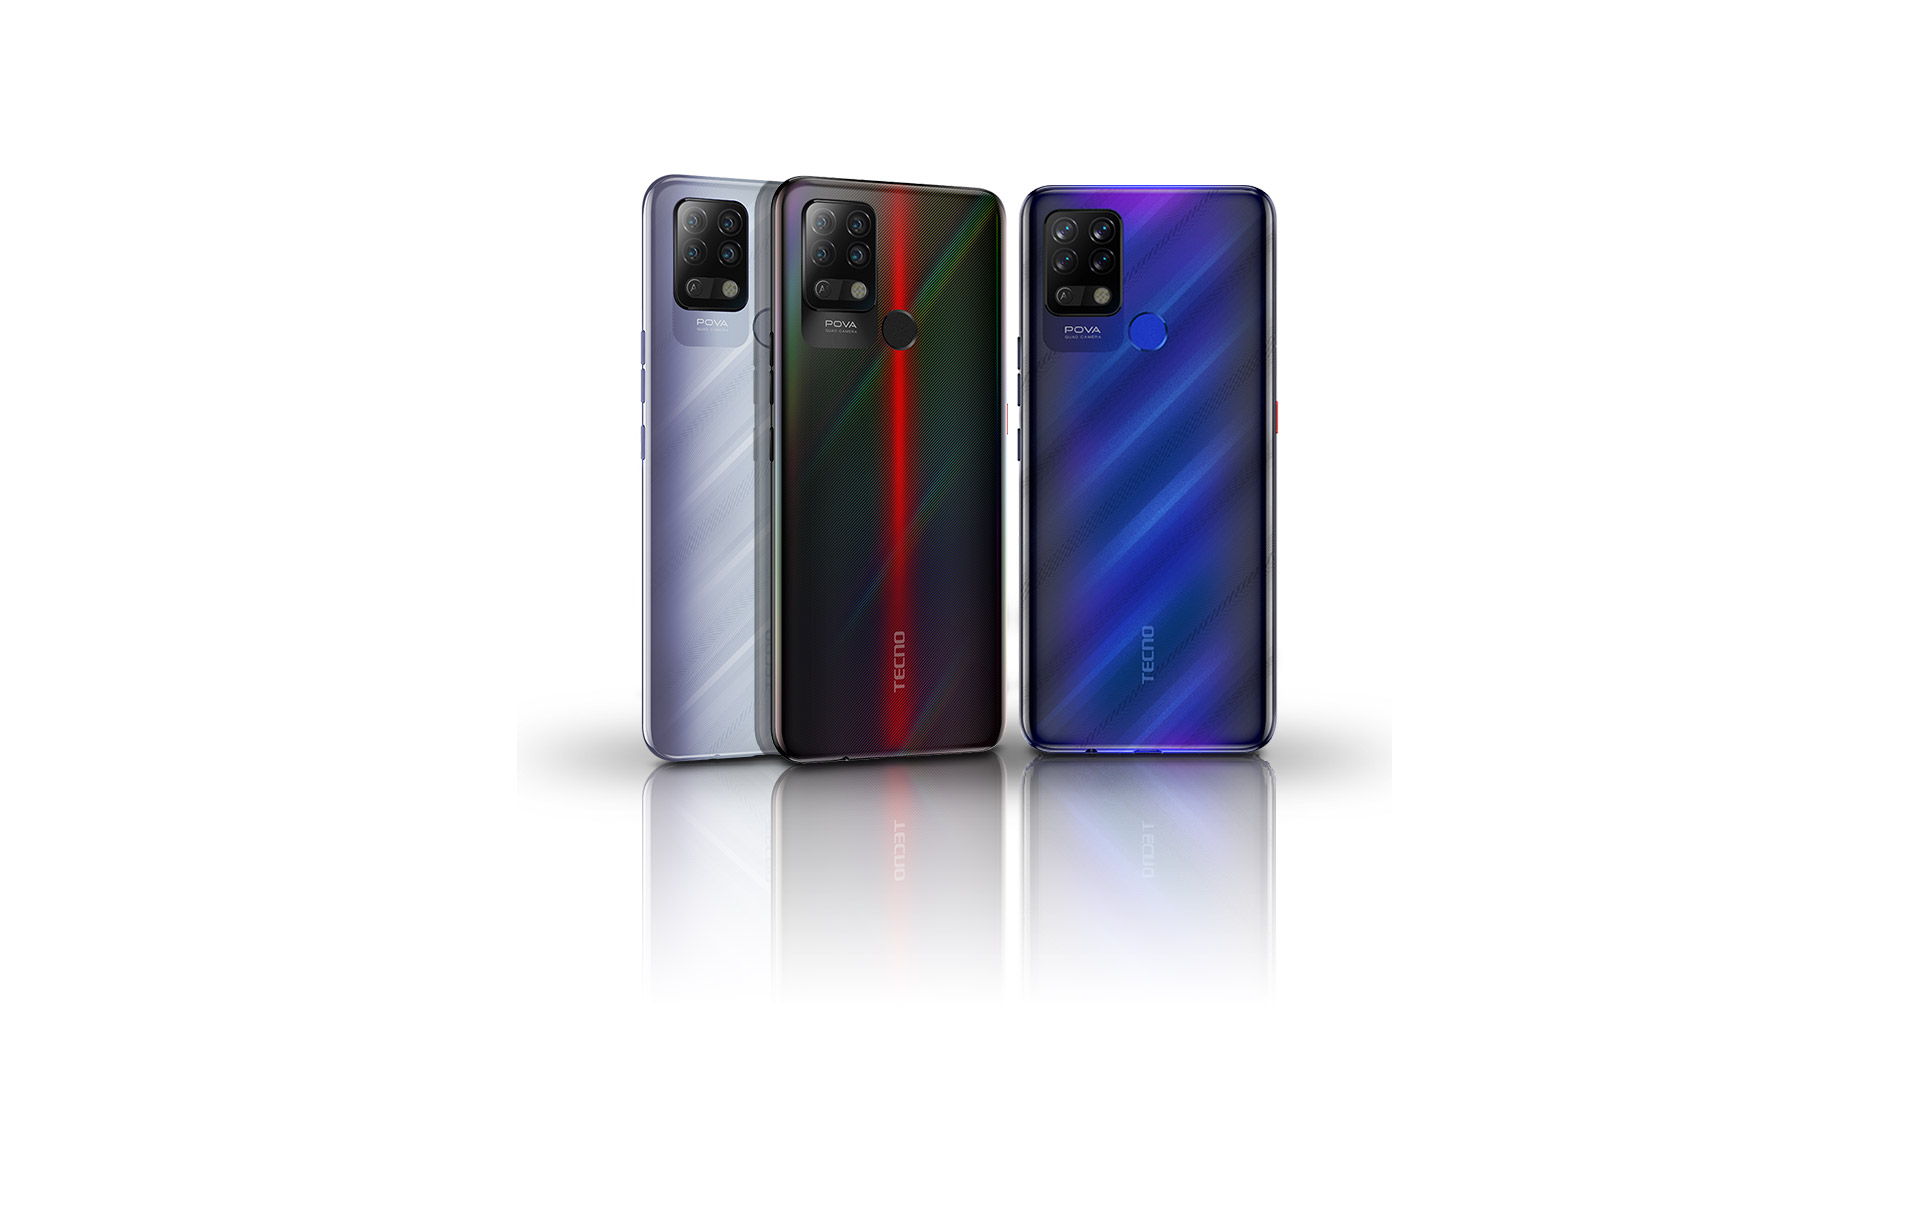 TECNO Pova is official with 6000mAh battery plus the Helio G80